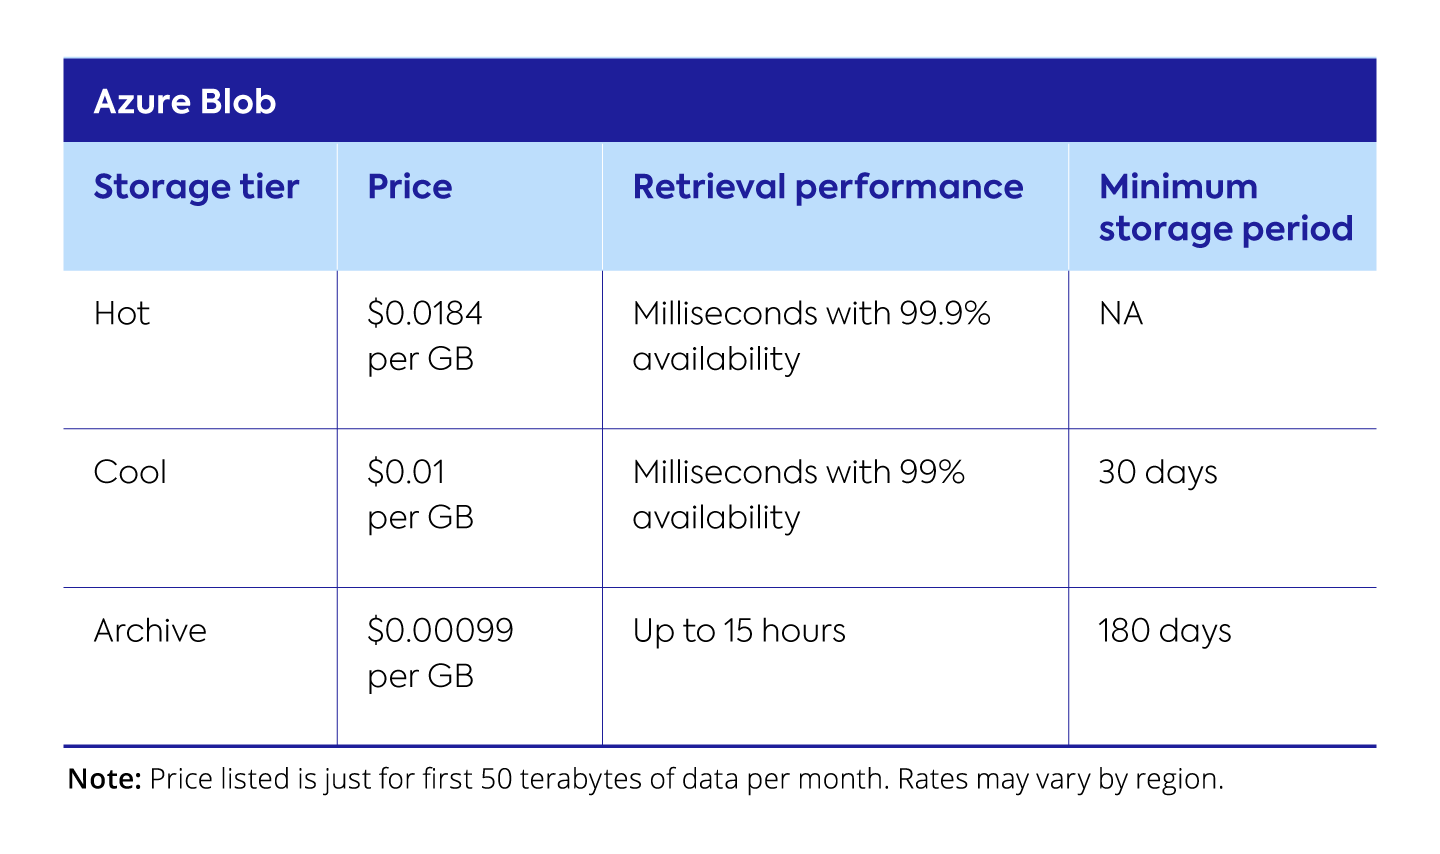 Cost savings for Azure Blob with tiered storage